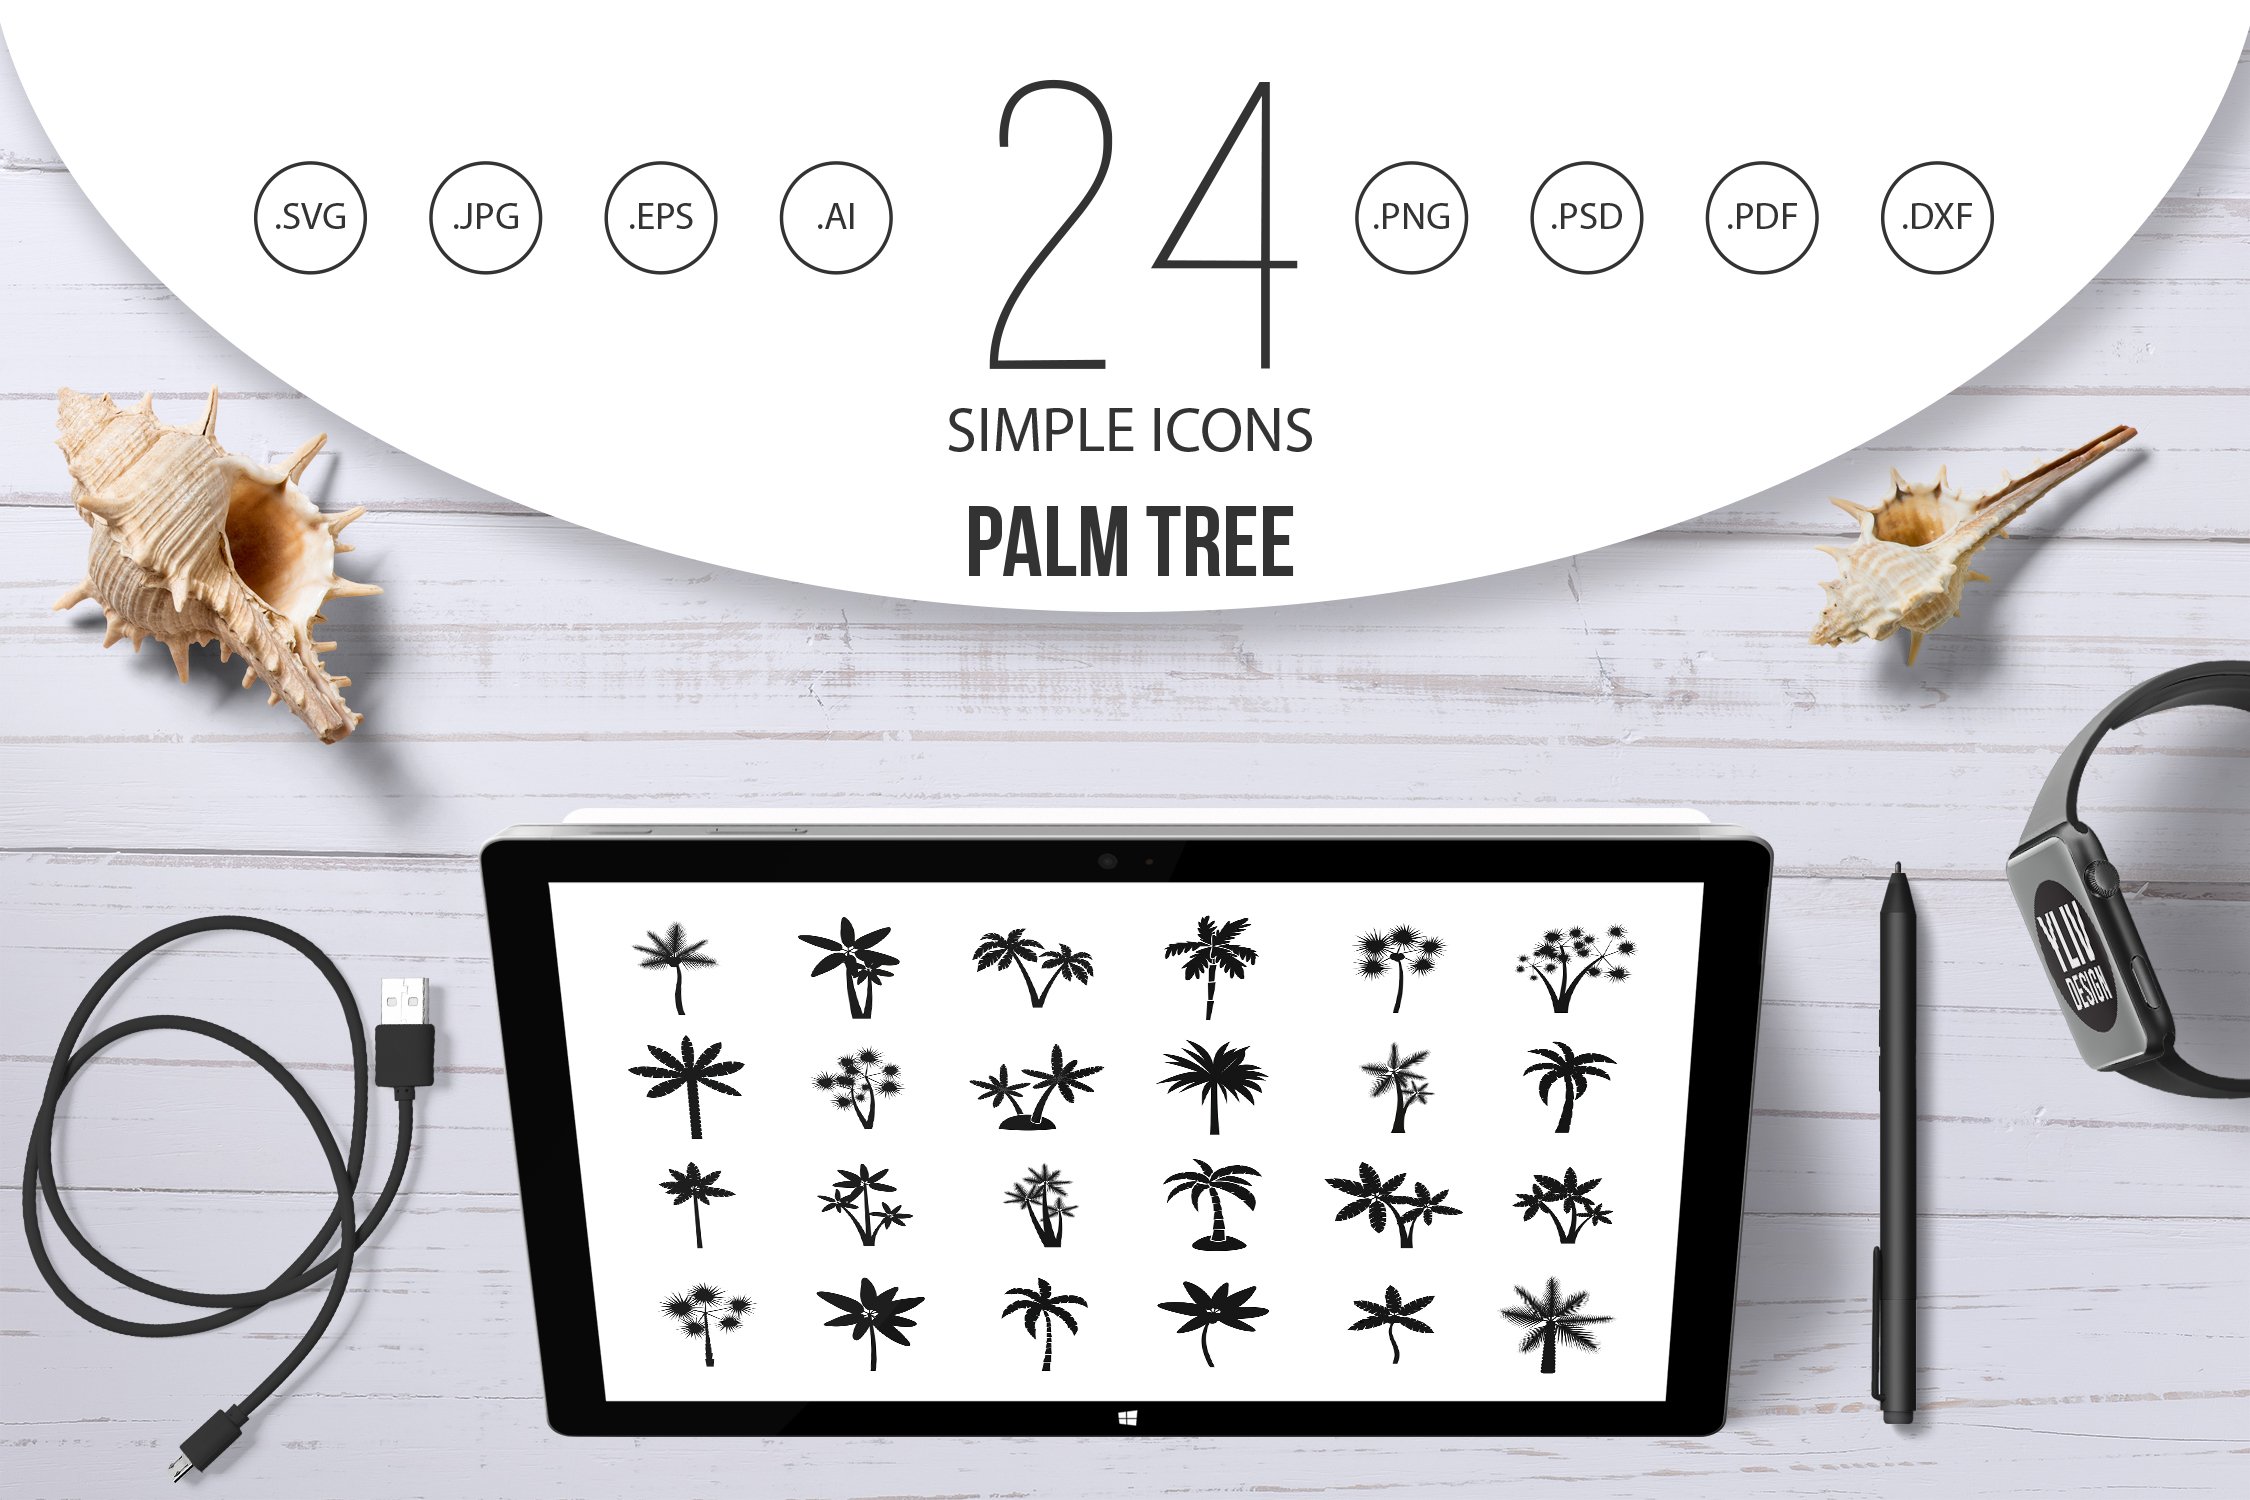 Palm tree icon set, simple style cover image.